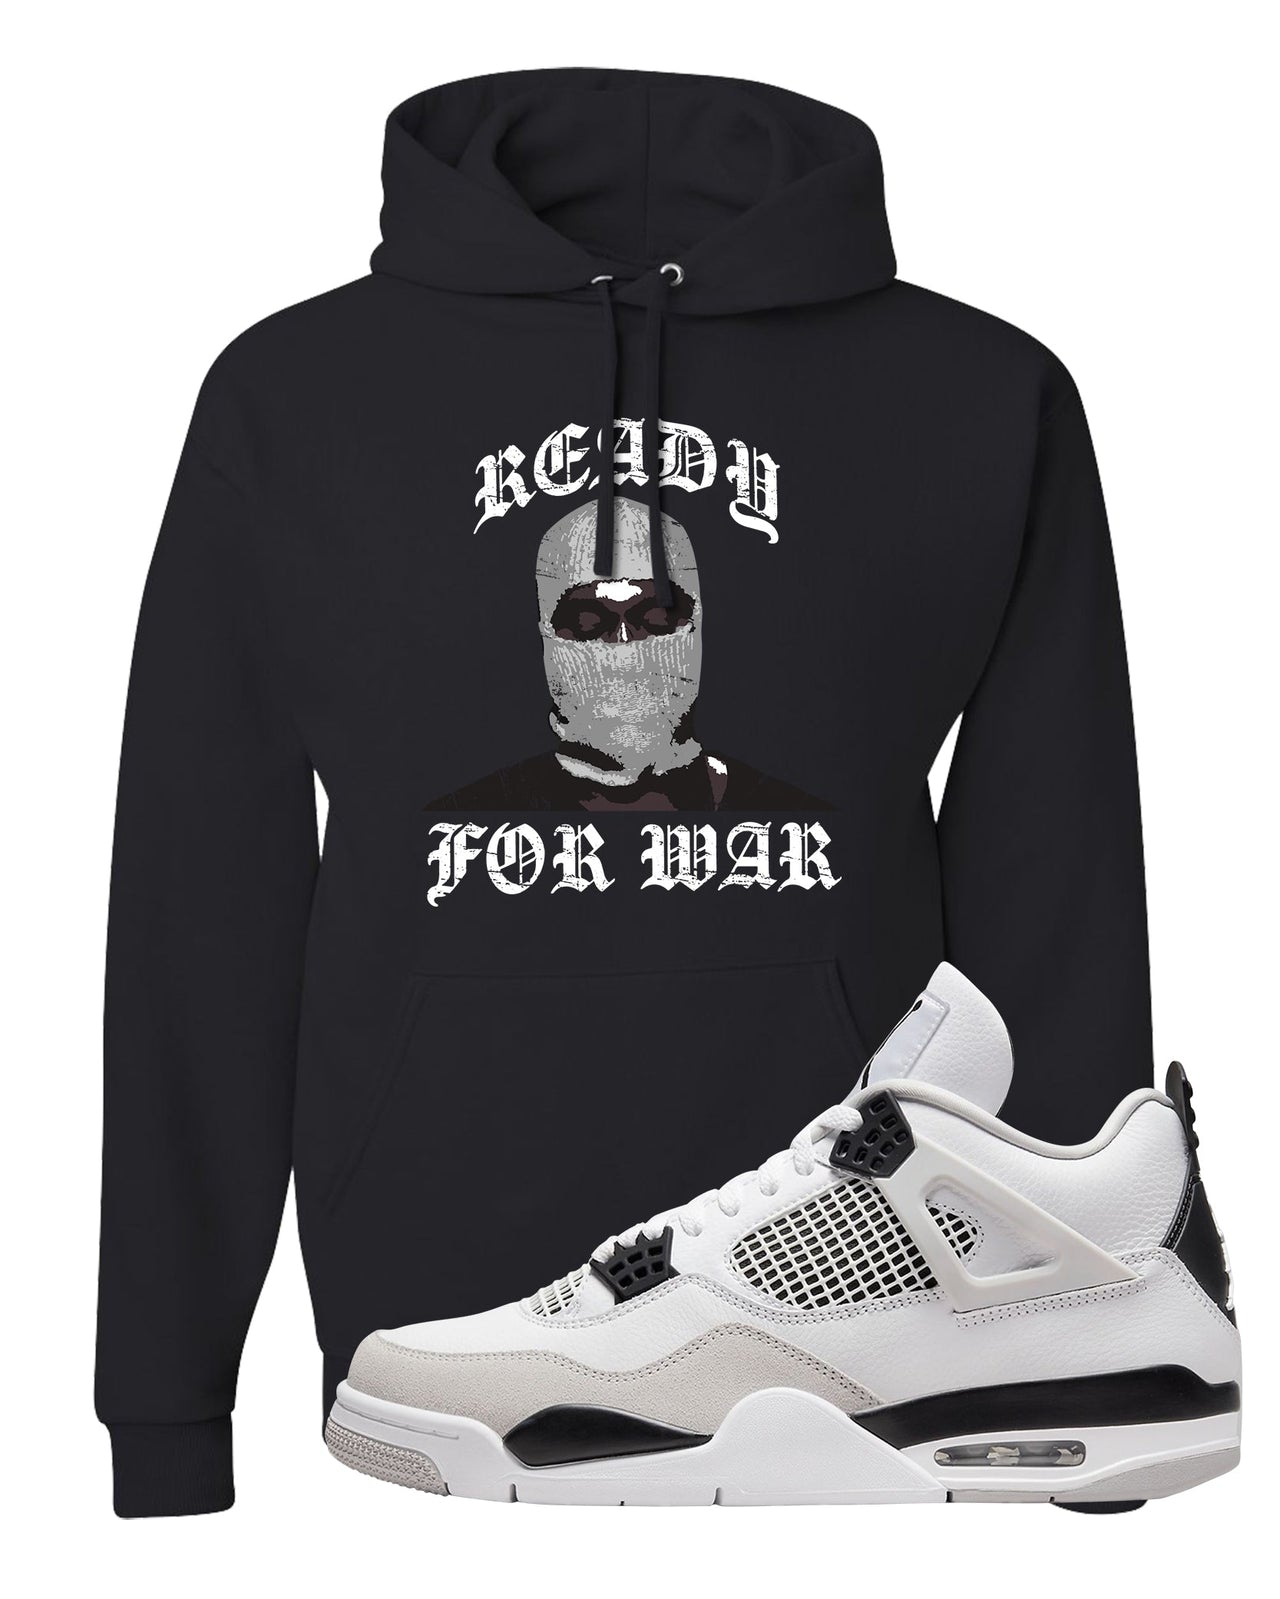 Military Black 4s Hoodie | Ready For War, Black